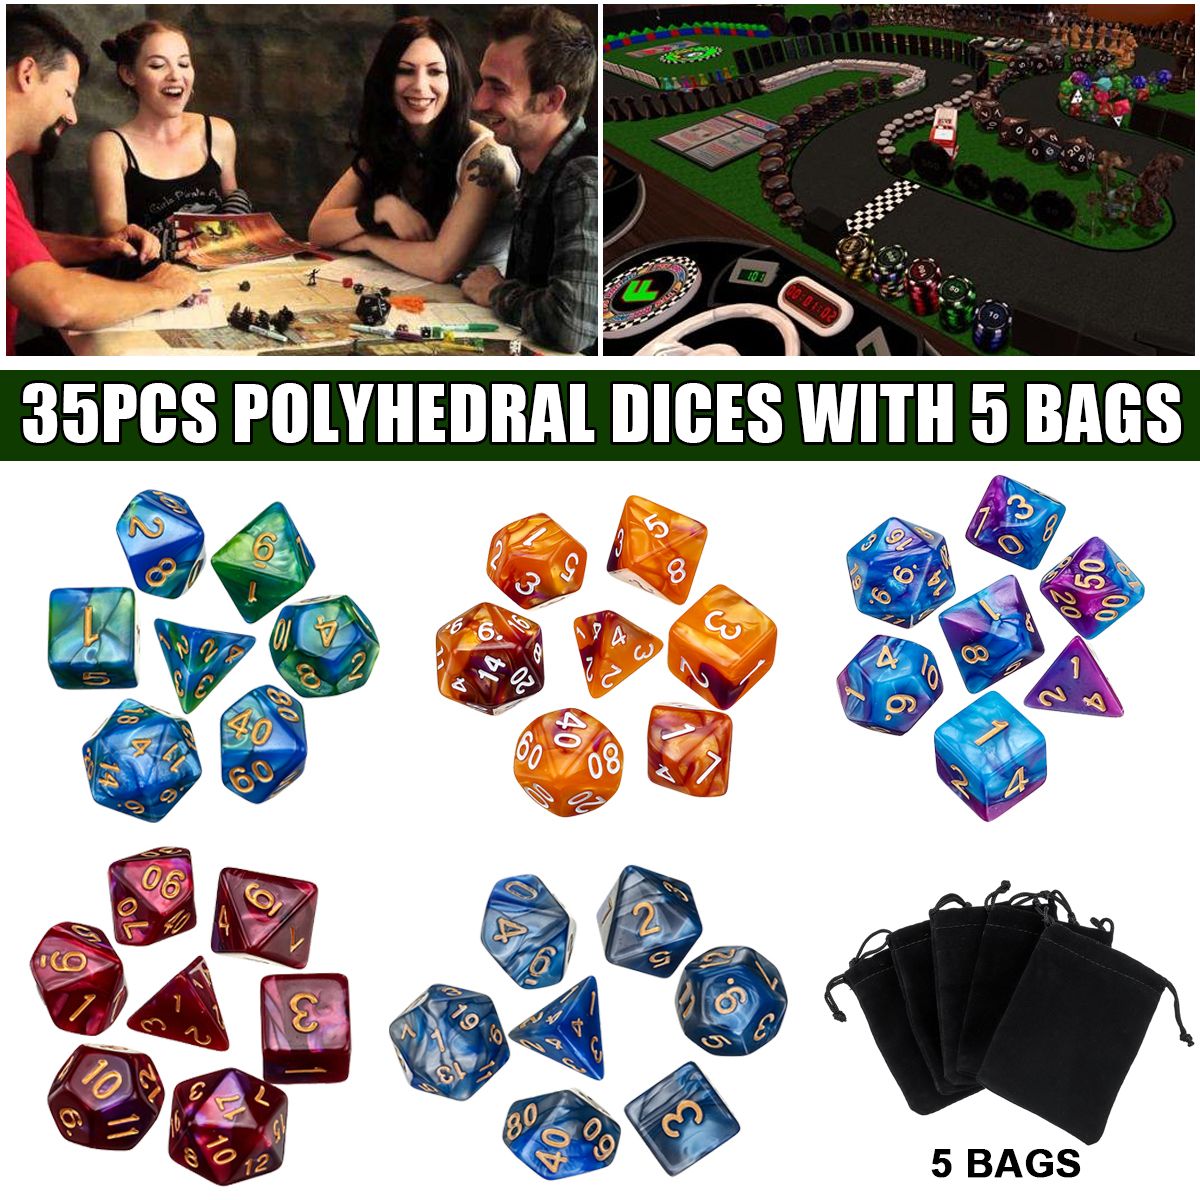 35Pcs-Acrylic-Polyhedral-Dice-Set-Role-Playing-Game-Dices-Gadget-for-Dungeons-Dragons-D20-D12-D10-D8-1600700